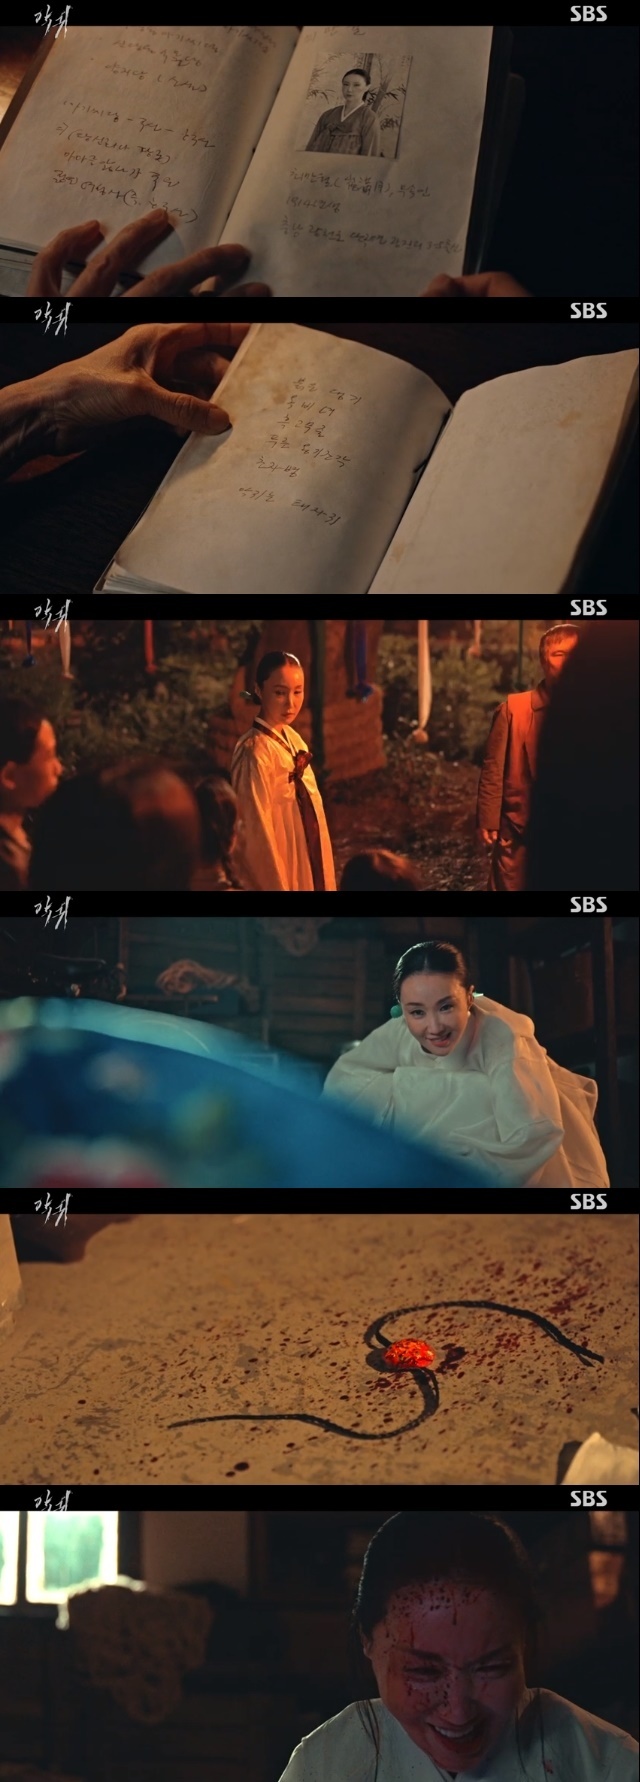 The shaman Oh Yeon! Baby made his first appearance intensely with the truth of red Daenggi.In the second episode of SBS Friday-Saturday Drama a demon (playwright Kim Eun-hee / director Lee Jung-rim, Kim Jae-hong), which aired on June 24, Gusan! Young (Kim Tae-ri), who even lost his grandmother Kimchrysanthemum linne, held hands with the Salt Damage Award (Oh Jung-se).On this day, Mo Xuanyu, who died with the Gusan! yeong-eun salt damage statue, revealed the story of Mo Xuanyu. The message that Mo Xuanyu wanted to convey to the people in the form of a ghost was the child abuse of his sister who was not reported to the birth.Gusan!yeong-eun, who succeeded in saving her sister by joining forces with the salt damage prize and capturing her parents, said, There is no ghost.Mo Xuanyu also died and Jin-wook died because of humans like that a demon. It is not because of ghosts. He completely ignored contact on salt damage.However, Gusan!yeong-eun noticed himself getting more and more strange. Jasin steals the Doll of a child he does not like and scratches it with a knife, as well as witnessing a demon with the face of Jasin in the mirror.Every time a salt damage prize was released, a demon shadow began to be seen in the eyes of Gusan!Gusan! The next victim of a demon with the face of the spirit was chrysanthemum linne.Gusan! yeong-eun hurriedly headed to Jomos house, but Kimchrysanthemum linne had already died like a mouthpiece (Jin Seon-gyu).When Gusan! Youngs mother Yoon Kyung-moon (Park Ji-young) heard that Gusan! Young had inherited the red Daenggi as a relic, the salt damage prize, which had come to Kimchrysanthemum linne, comforted Gusan!In the meantime, Jasin showed the red Daenggi he had taken and said, When I received this, a demon was attached to you. Jasins mother also revealed that he was a victim of red Daenggi.The salt damage prize also said, After my mother died, this red Daenggi disappeared.I found Daenggi by chance, and I found a paper written by the professor. He mentioned that Gusan! Youngs father had been investigating the red Daenggi before his death.However, when chrysanthemum linne died under the control of a demon, the oral mother burned the research journal she had collected so far.At this time, Gusan! yeong-eun Kim chrysanthemum linne welcomed how he died and confessed that he had also seen strange notes.Gusan!yeong-eun Can you remember what was written in the note? As shown in the salt damage, they drew a map. Then they found a place where Jangjin-ri where all the conditions of the map fit.The salt damage prize was convinced that if you go here, you will find a demon.On the other hand, the secrets of Jang Jin-ri and a demon were dimly revealed on this day. In 1958, a shaman (Oh Yeon! A minute) holding a red Daenggi looked around the girls, and after a while he was trapped in a warehouse and lured a hungry person to eat and killed him.